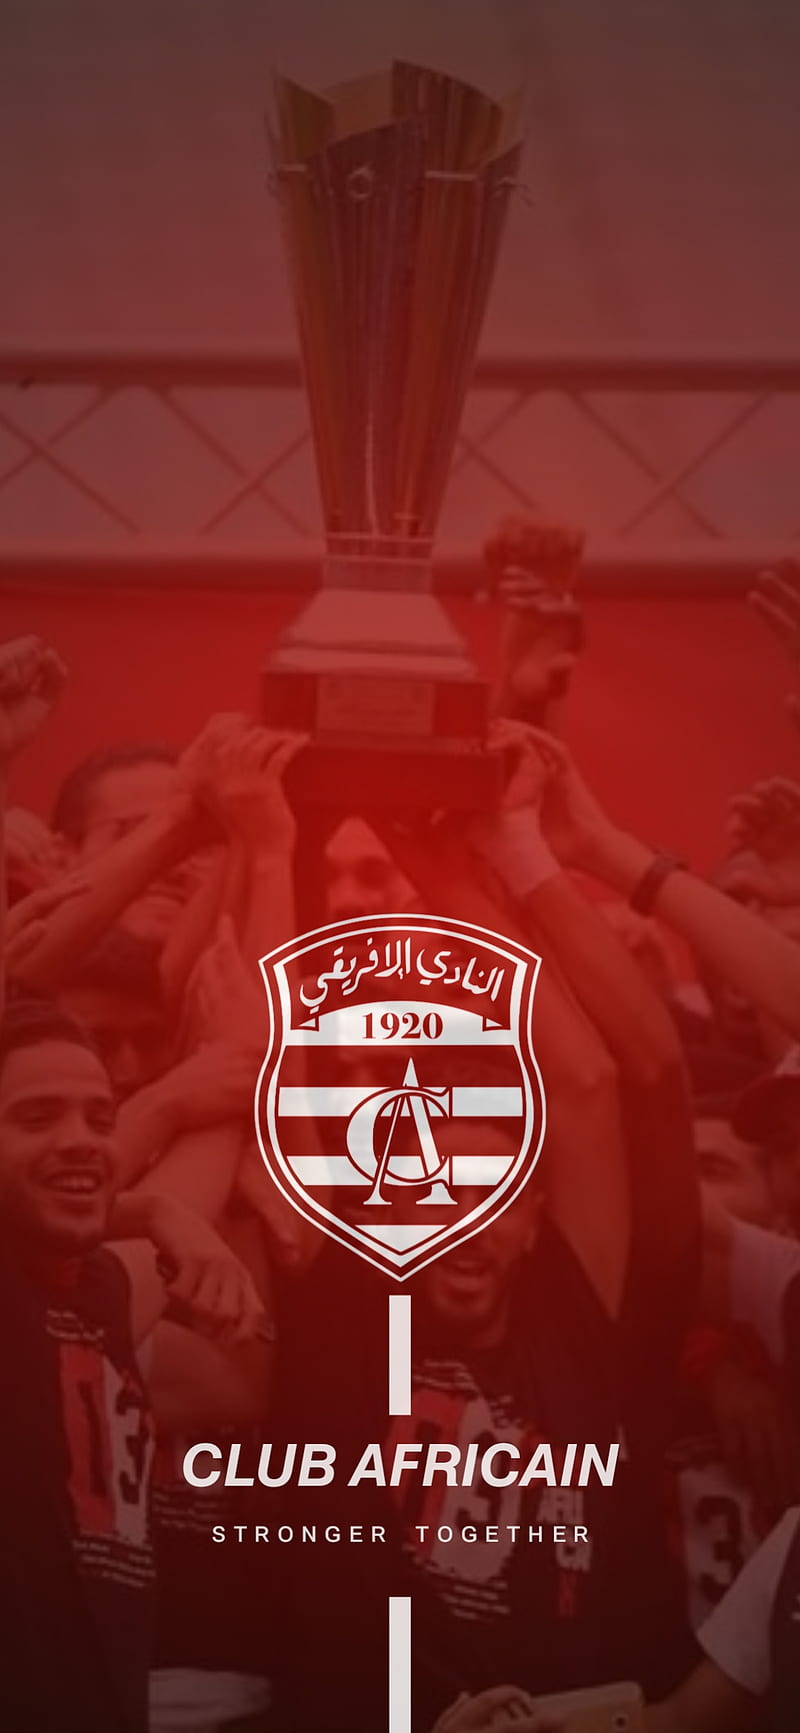 Club africain, ca, champions, coupe, football, ligue, sport, tunisia, HD phone wallpaper